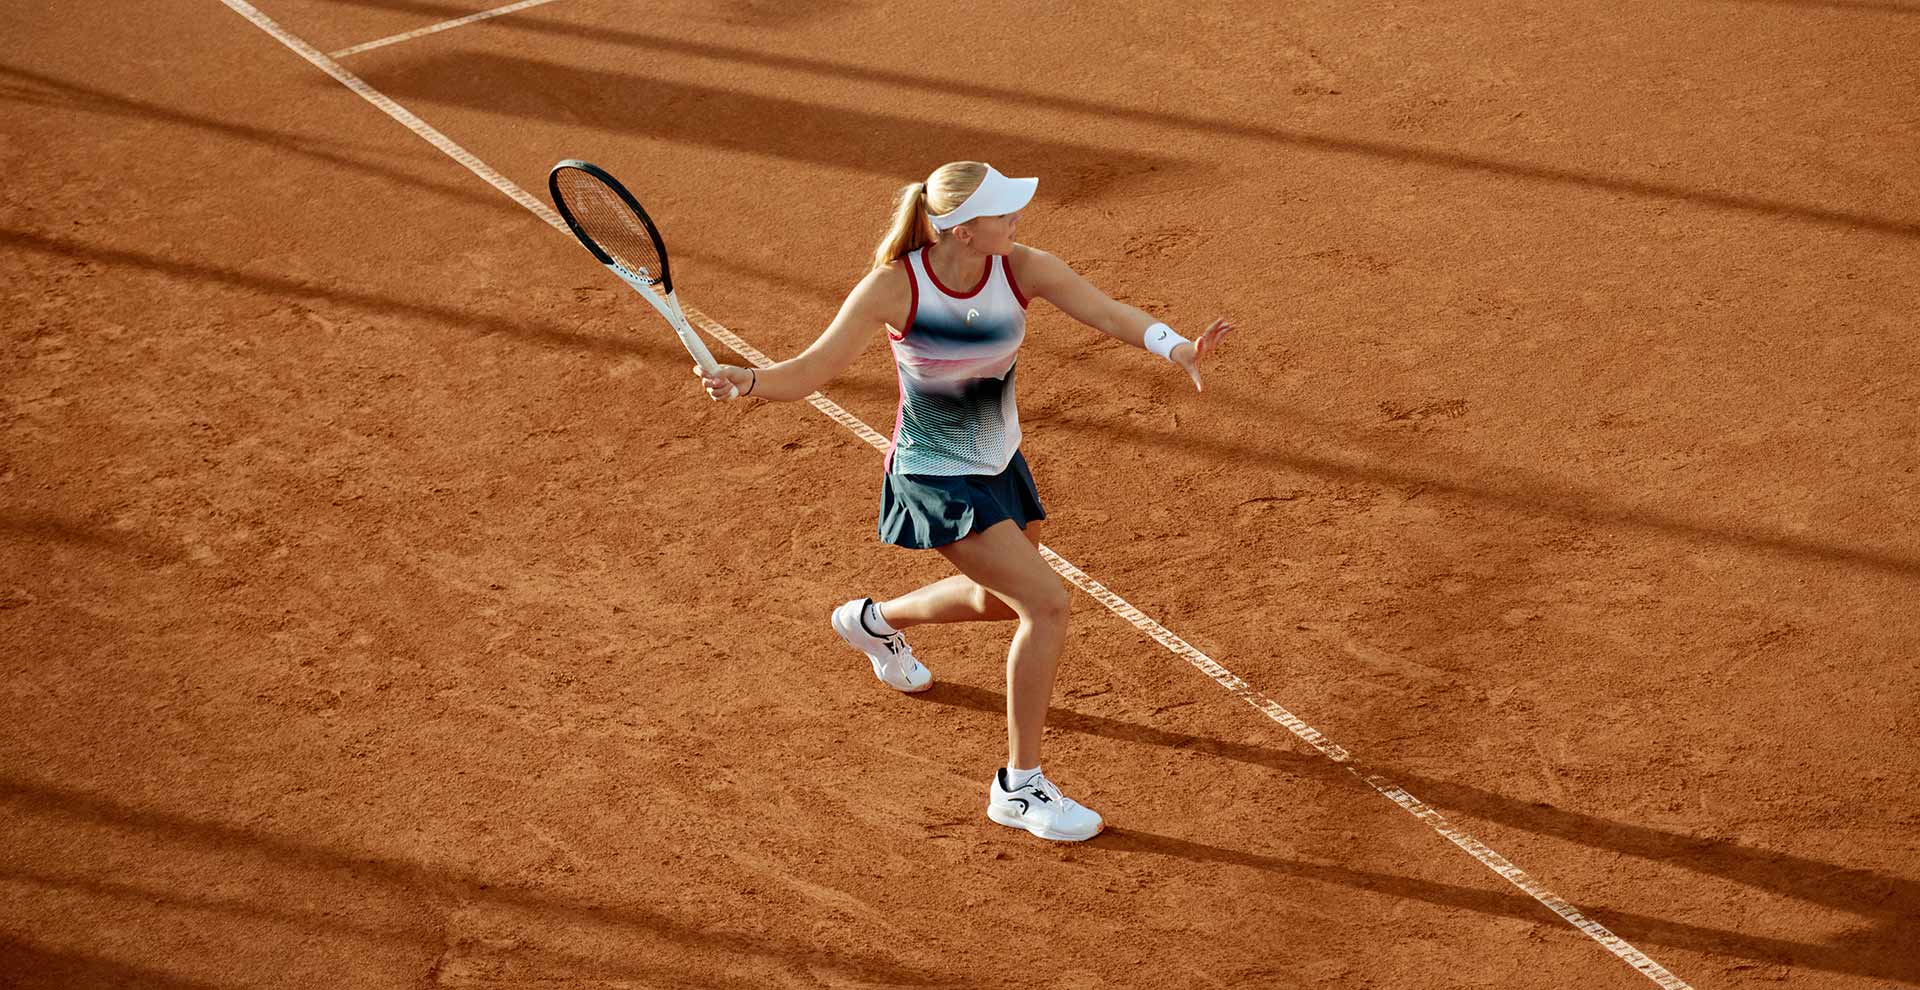 Why do Tennis Players wear Skirts?